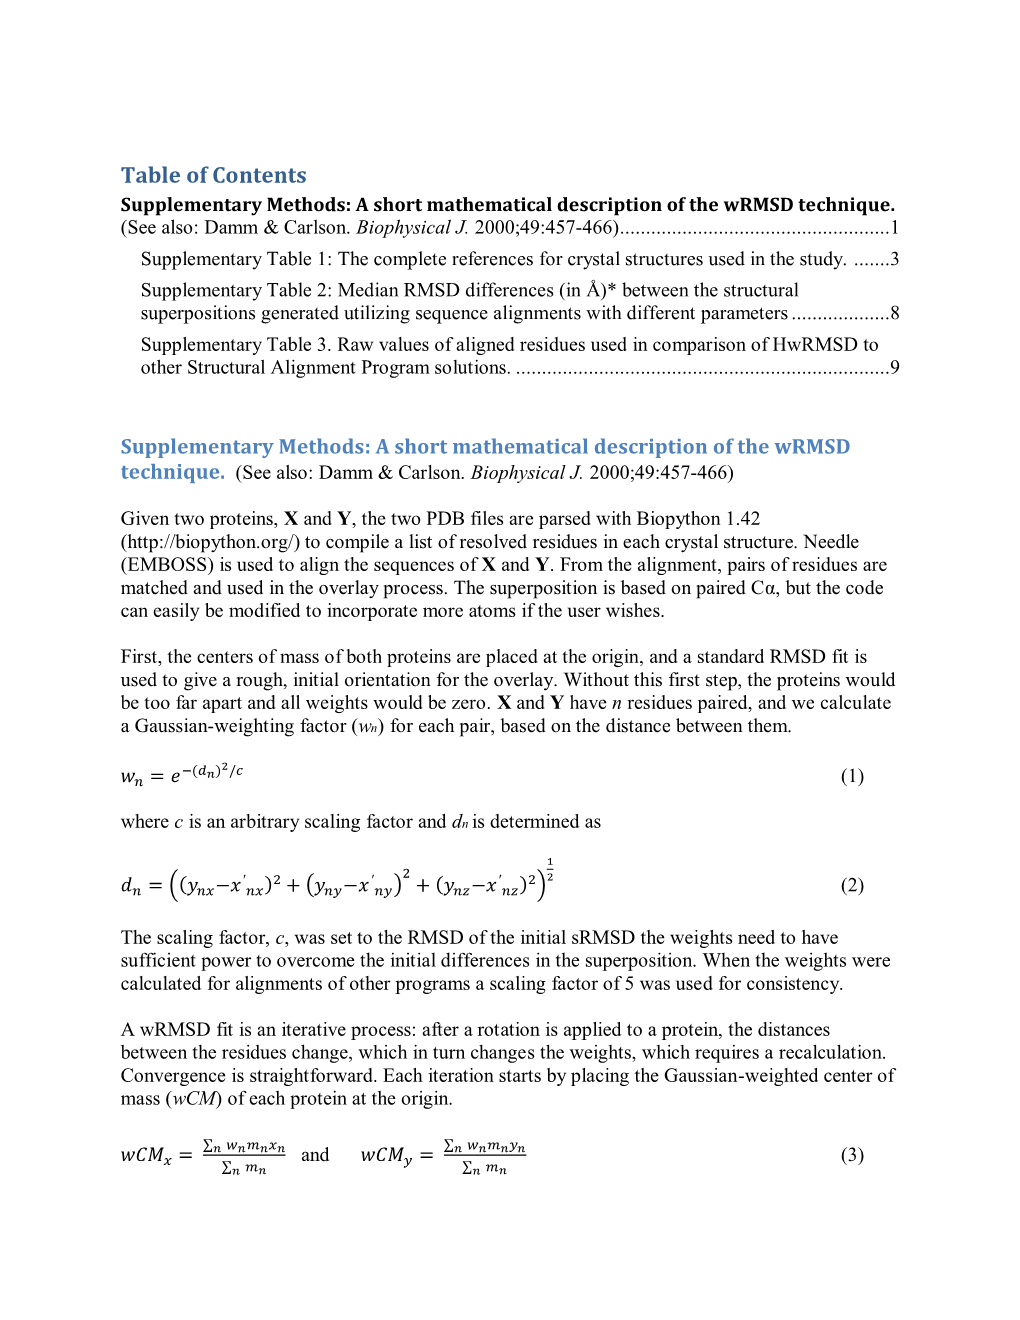 Table of Contents Supplementary Methods: a Short Mathematical Description of the Wrmsd Technique